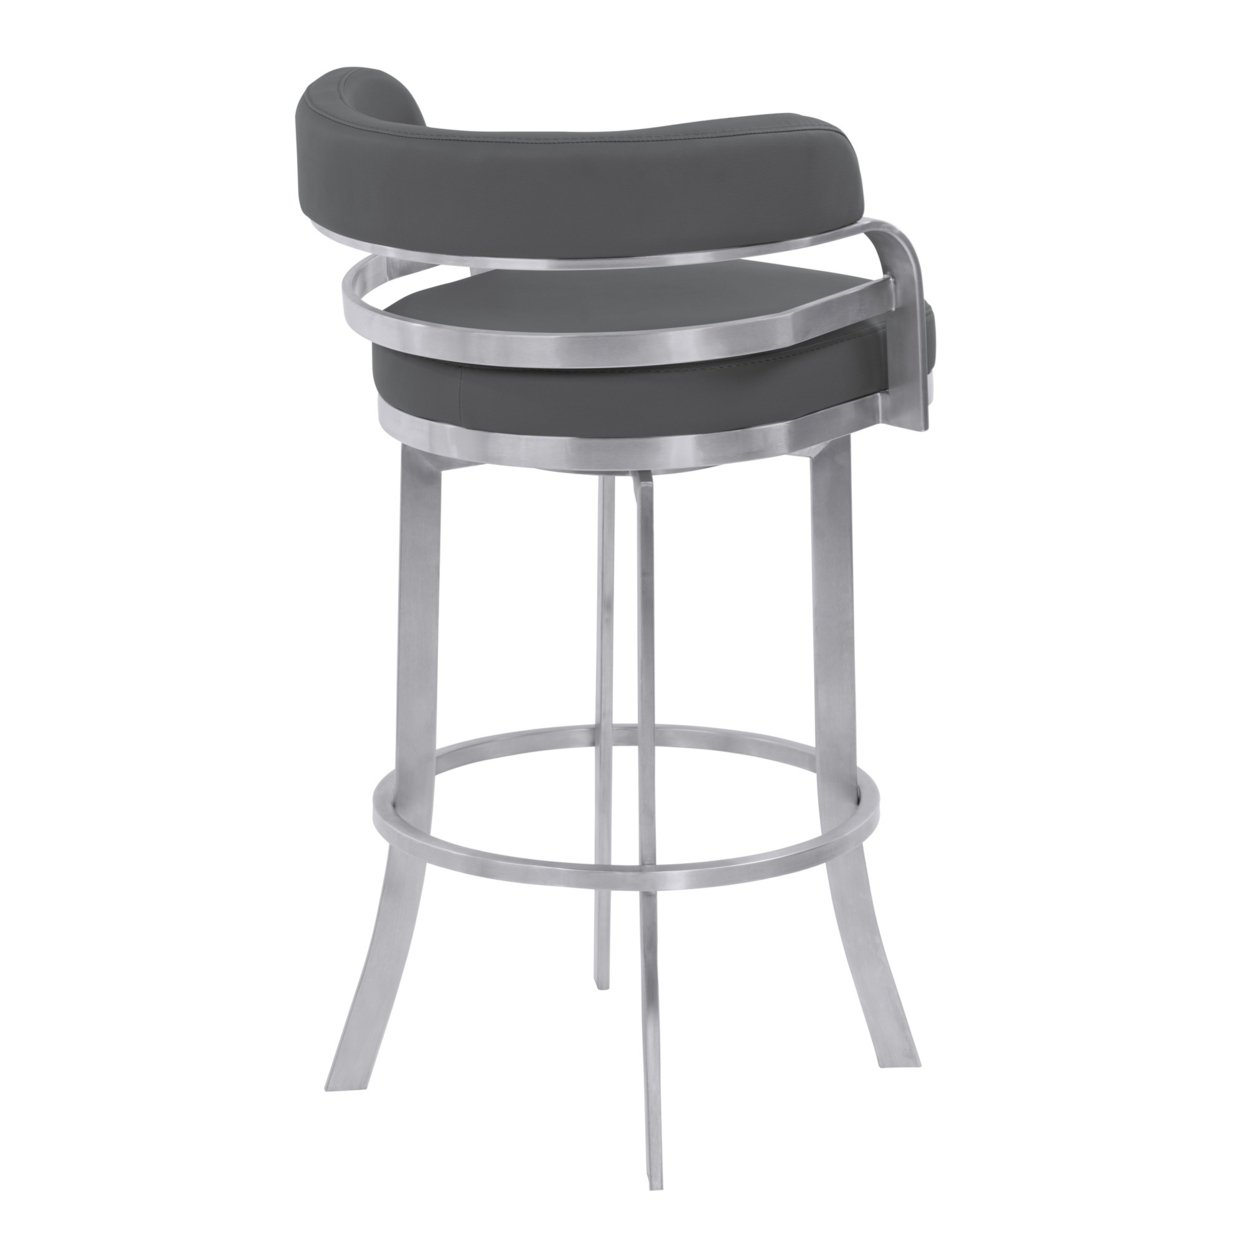 Metal Frame Counter Stool With Curved Leatherette Seating, Gray And Silver- Saltoro Sherpi